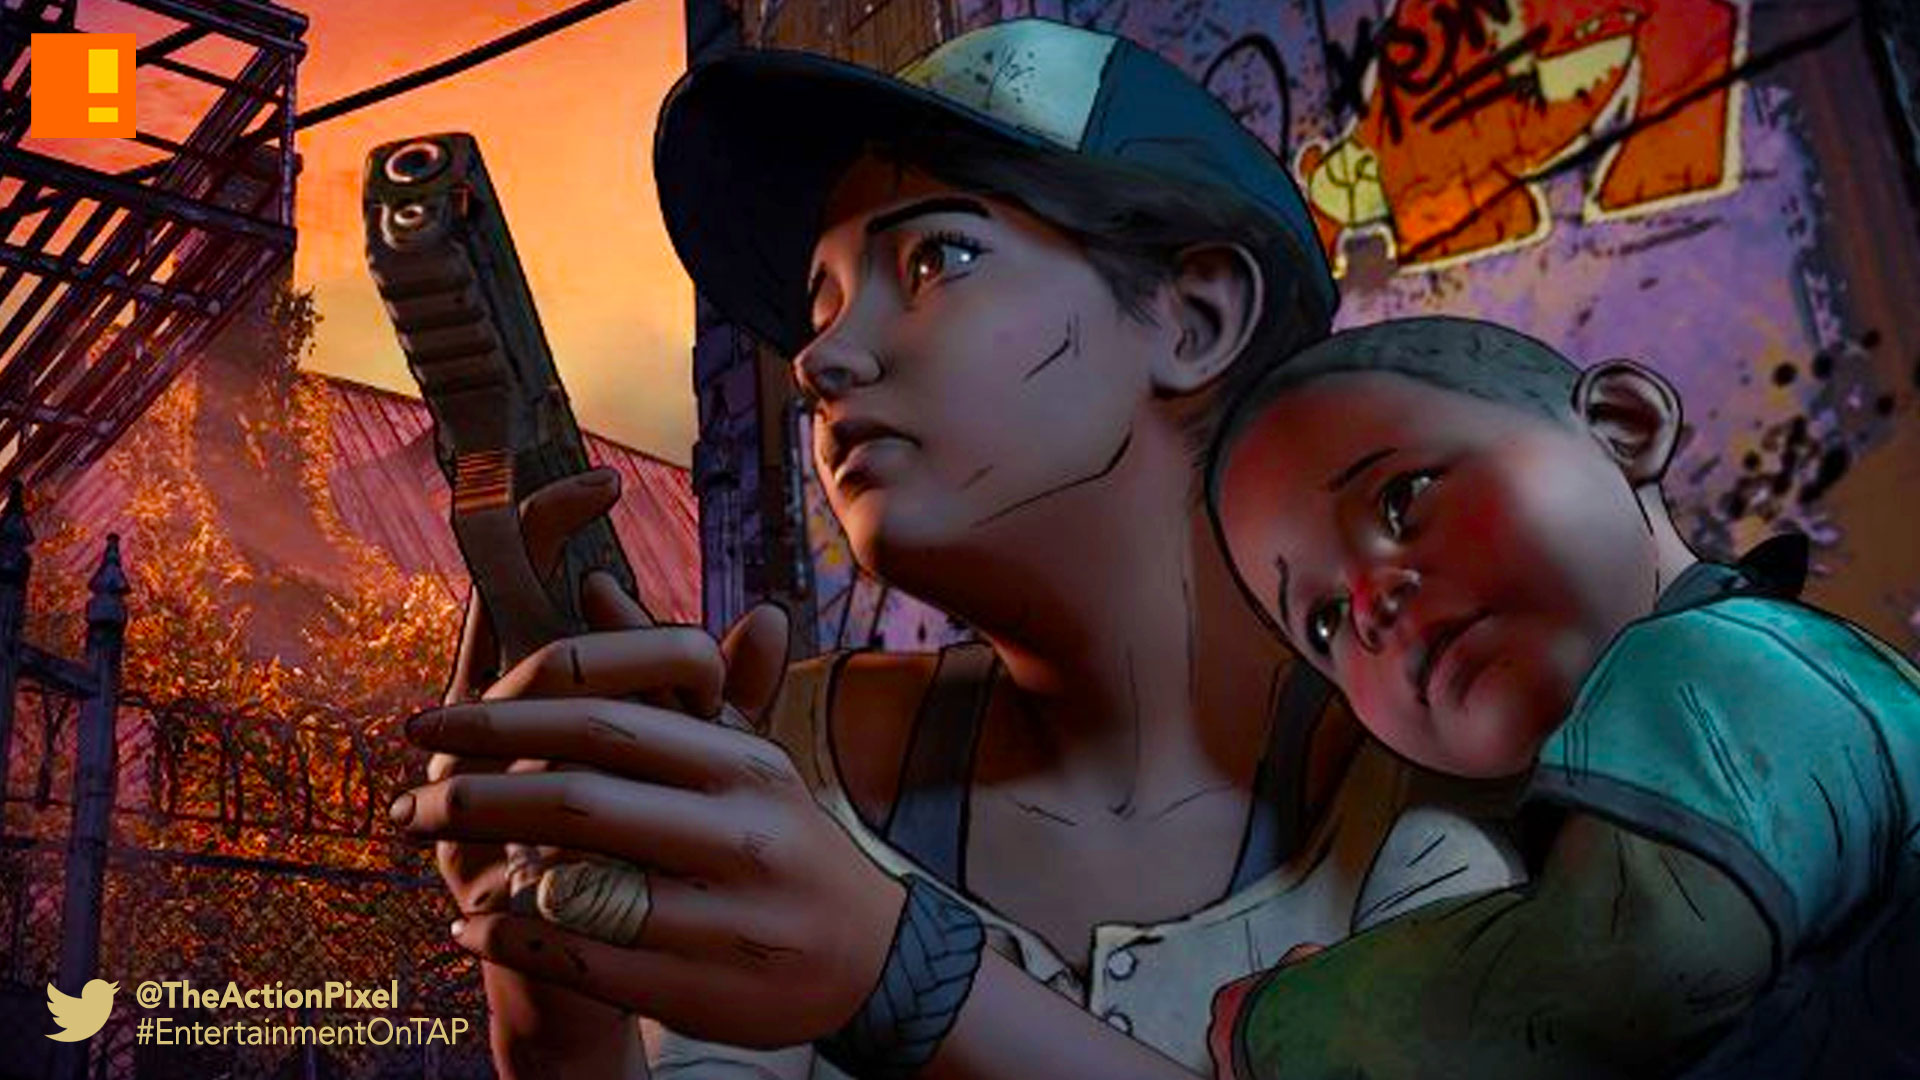 the walking dead, the telltale series, telltale games, Season 3,poster, a new frontier, clementine, images, teaser, release date